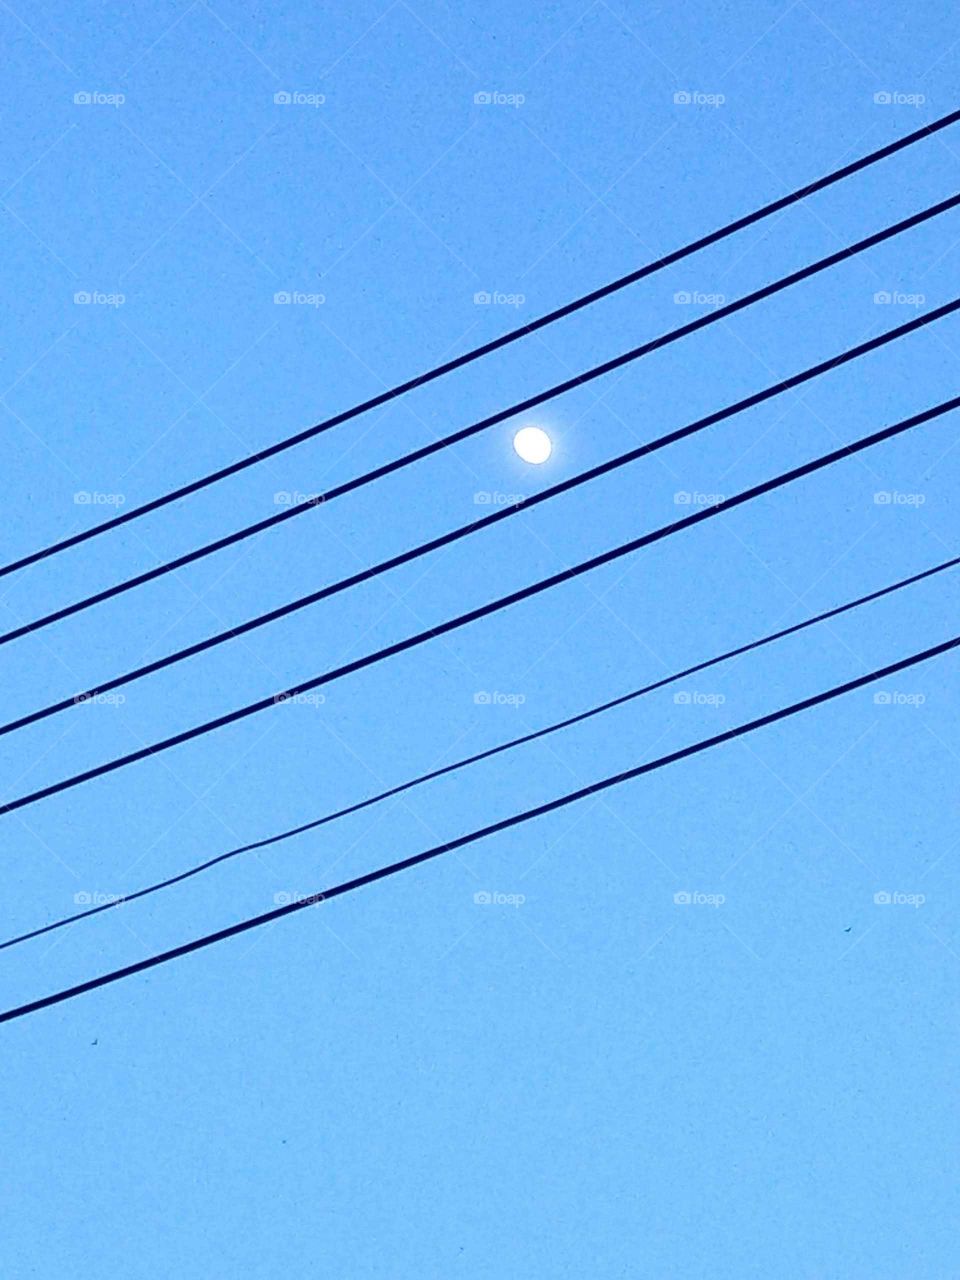 🤣🤣🤣the moon's music was also the same as gitar tablature. one day I found six electric wires in the night sky and the moon was a note. that blue sky was very clearly.